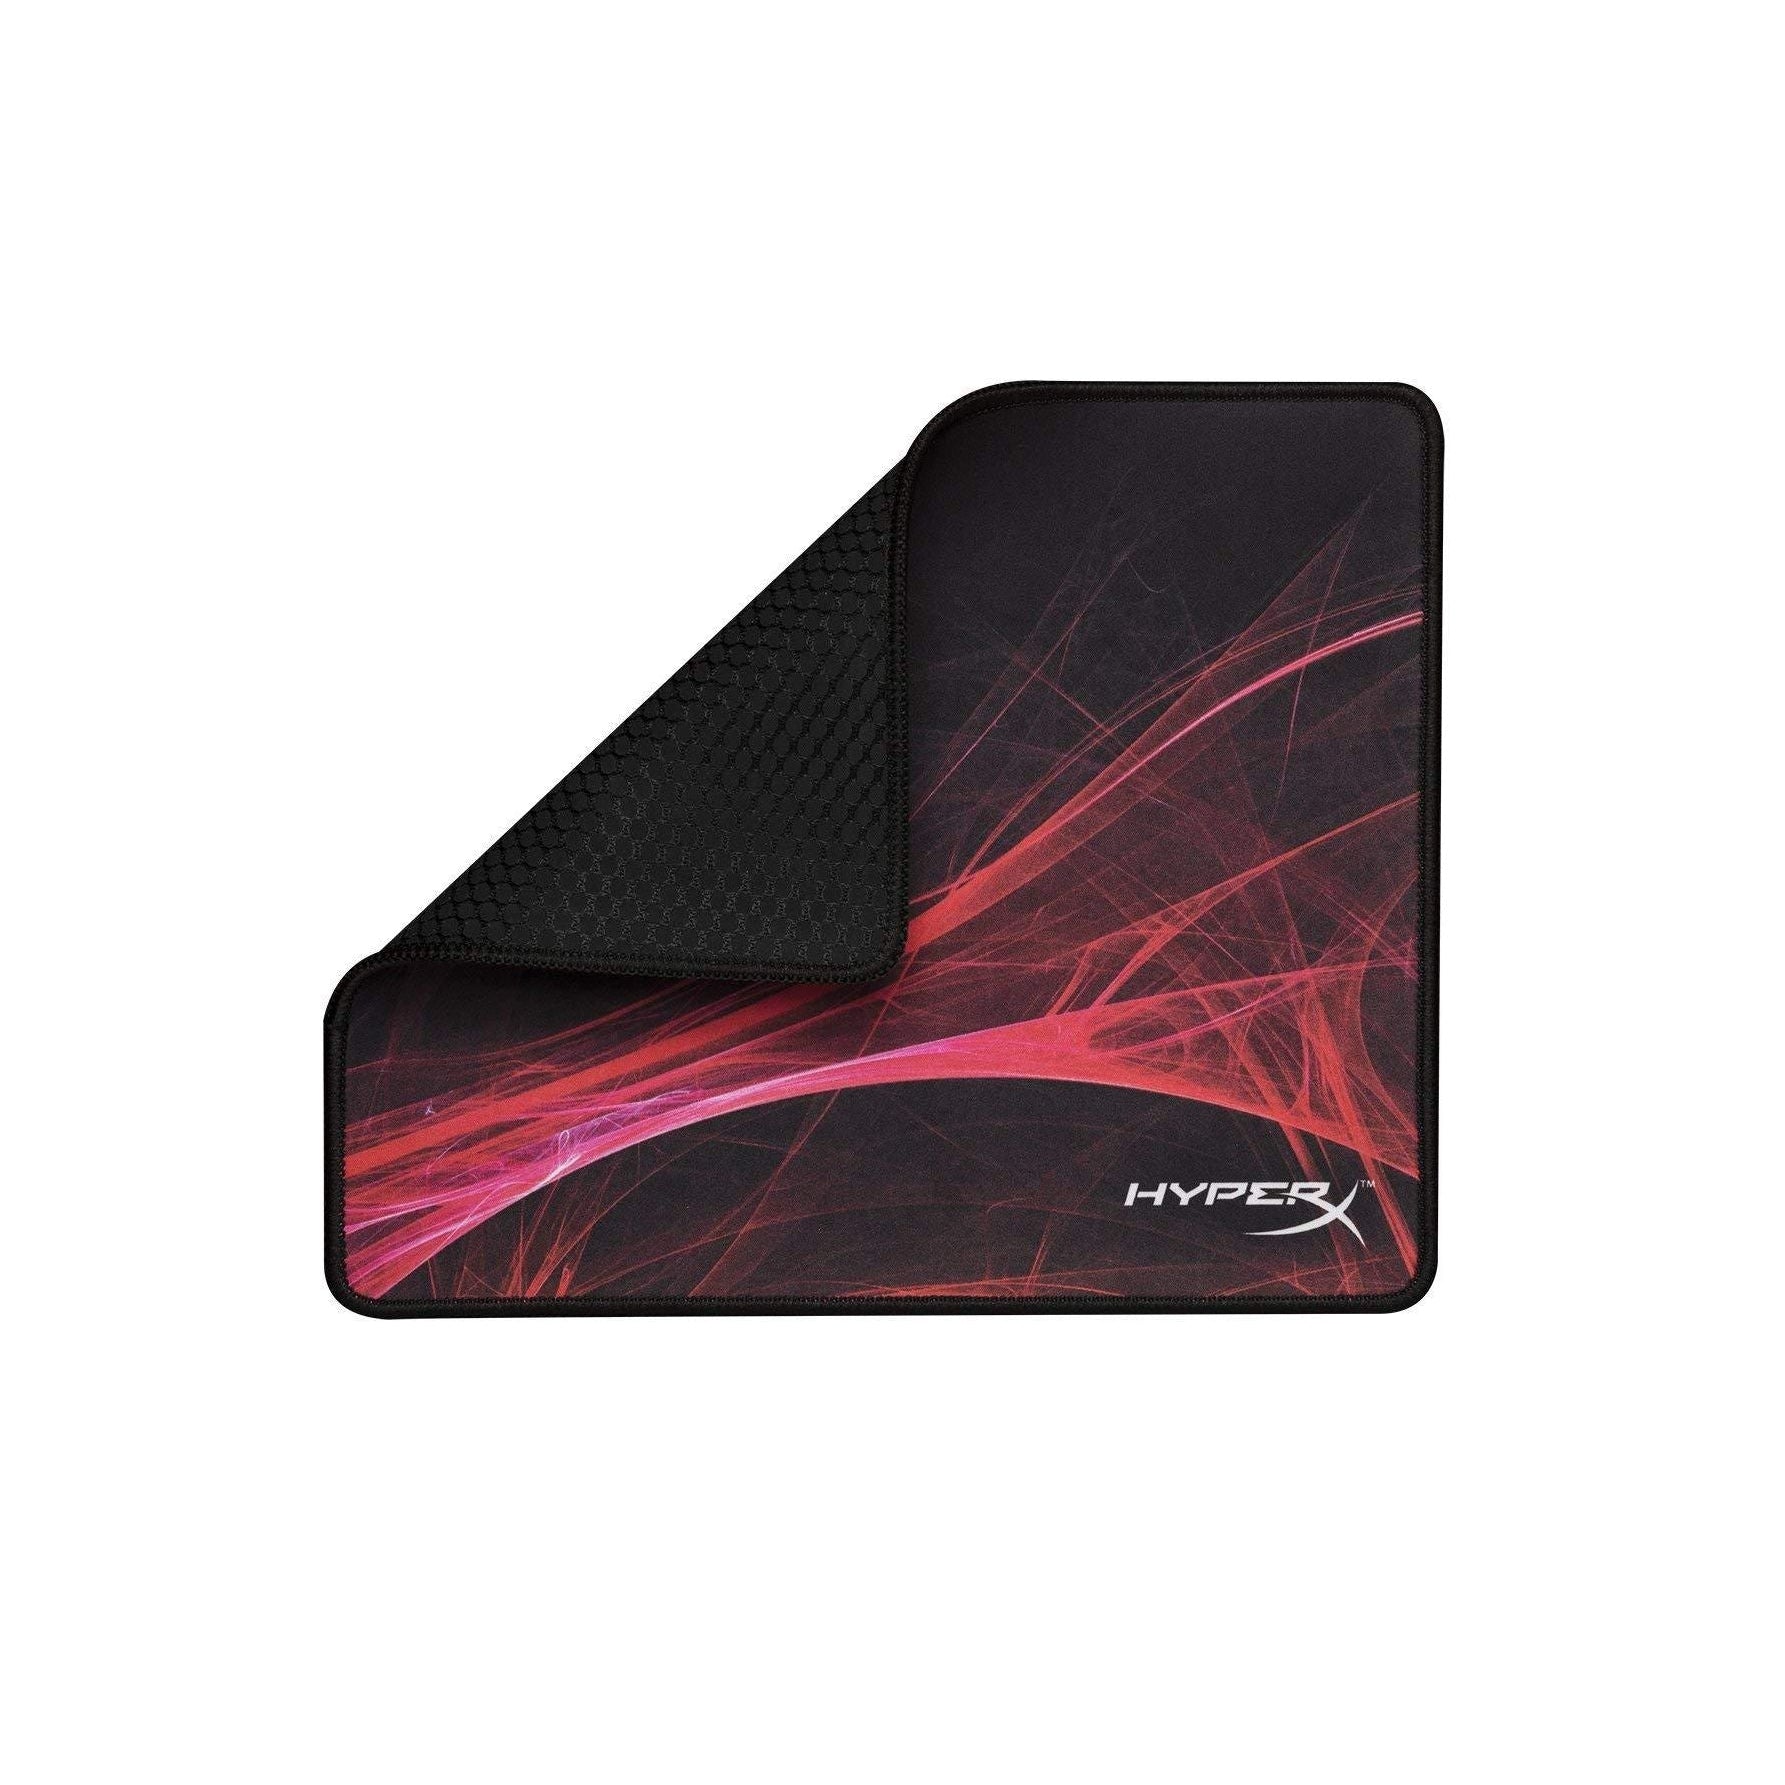 HyperX Fury S Pro Gaming Mouse Pad - Refurbished Excellent